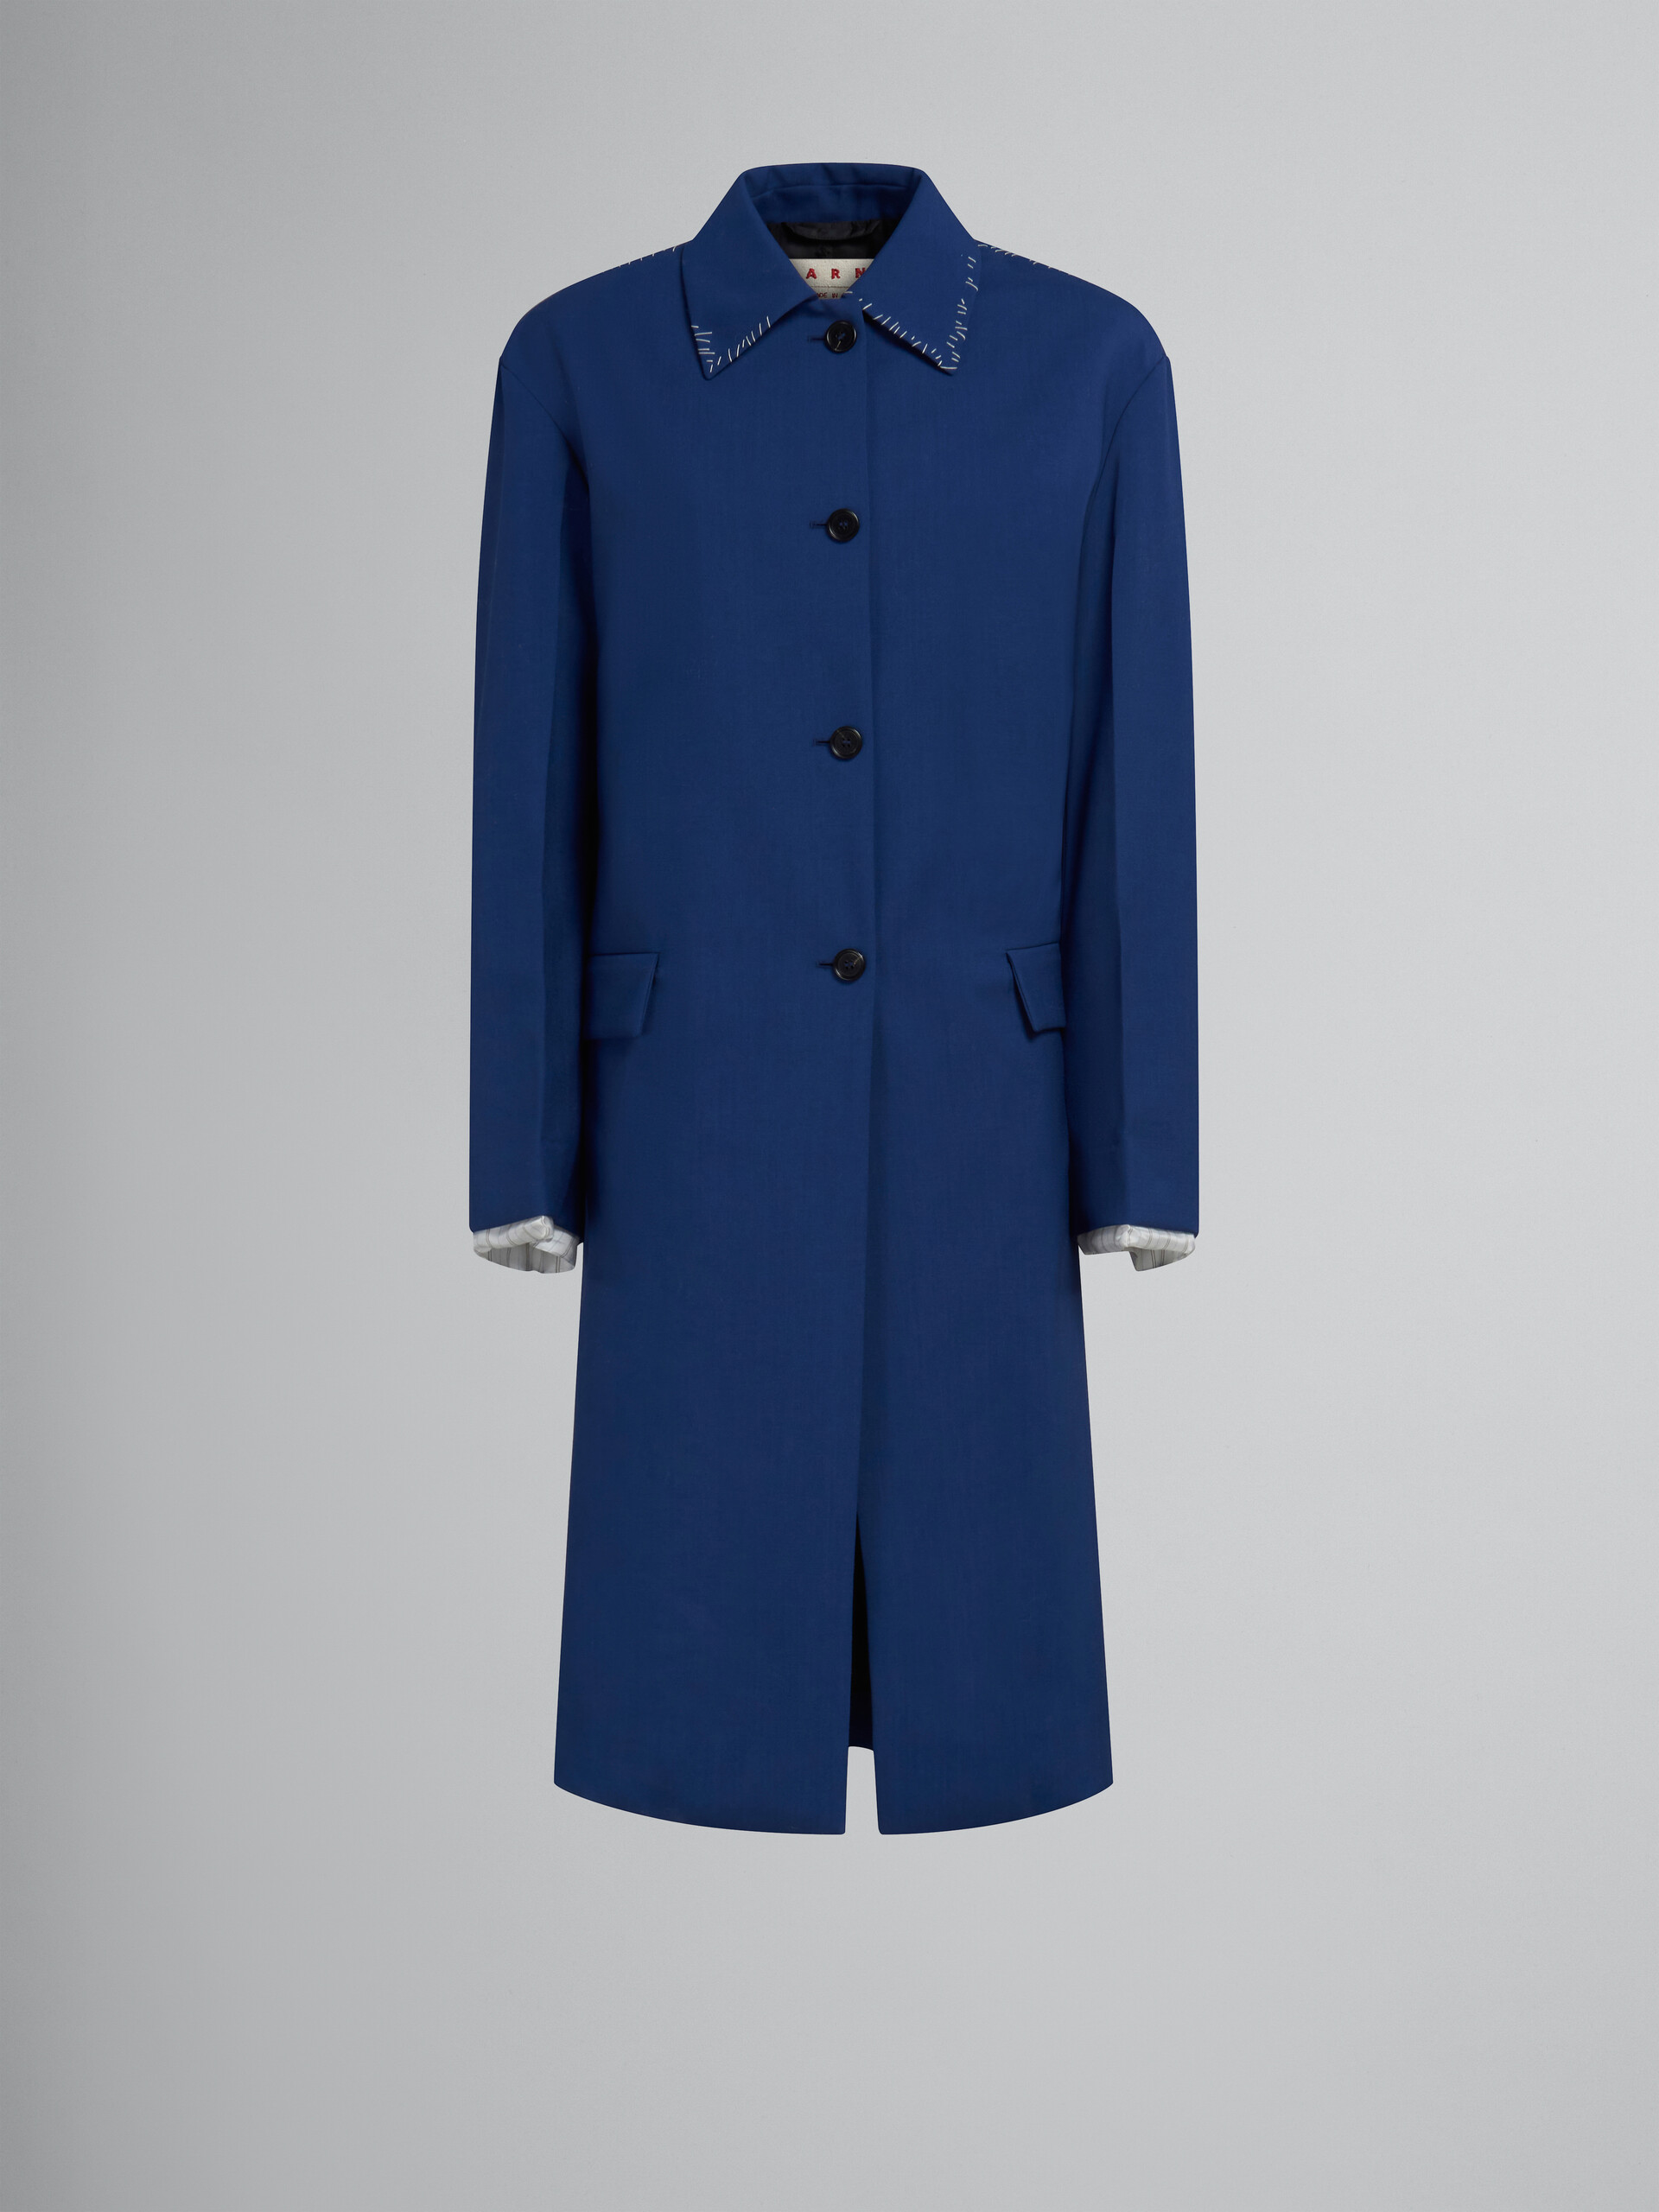 Blue tropical wool trench coat - Coat - Image 1